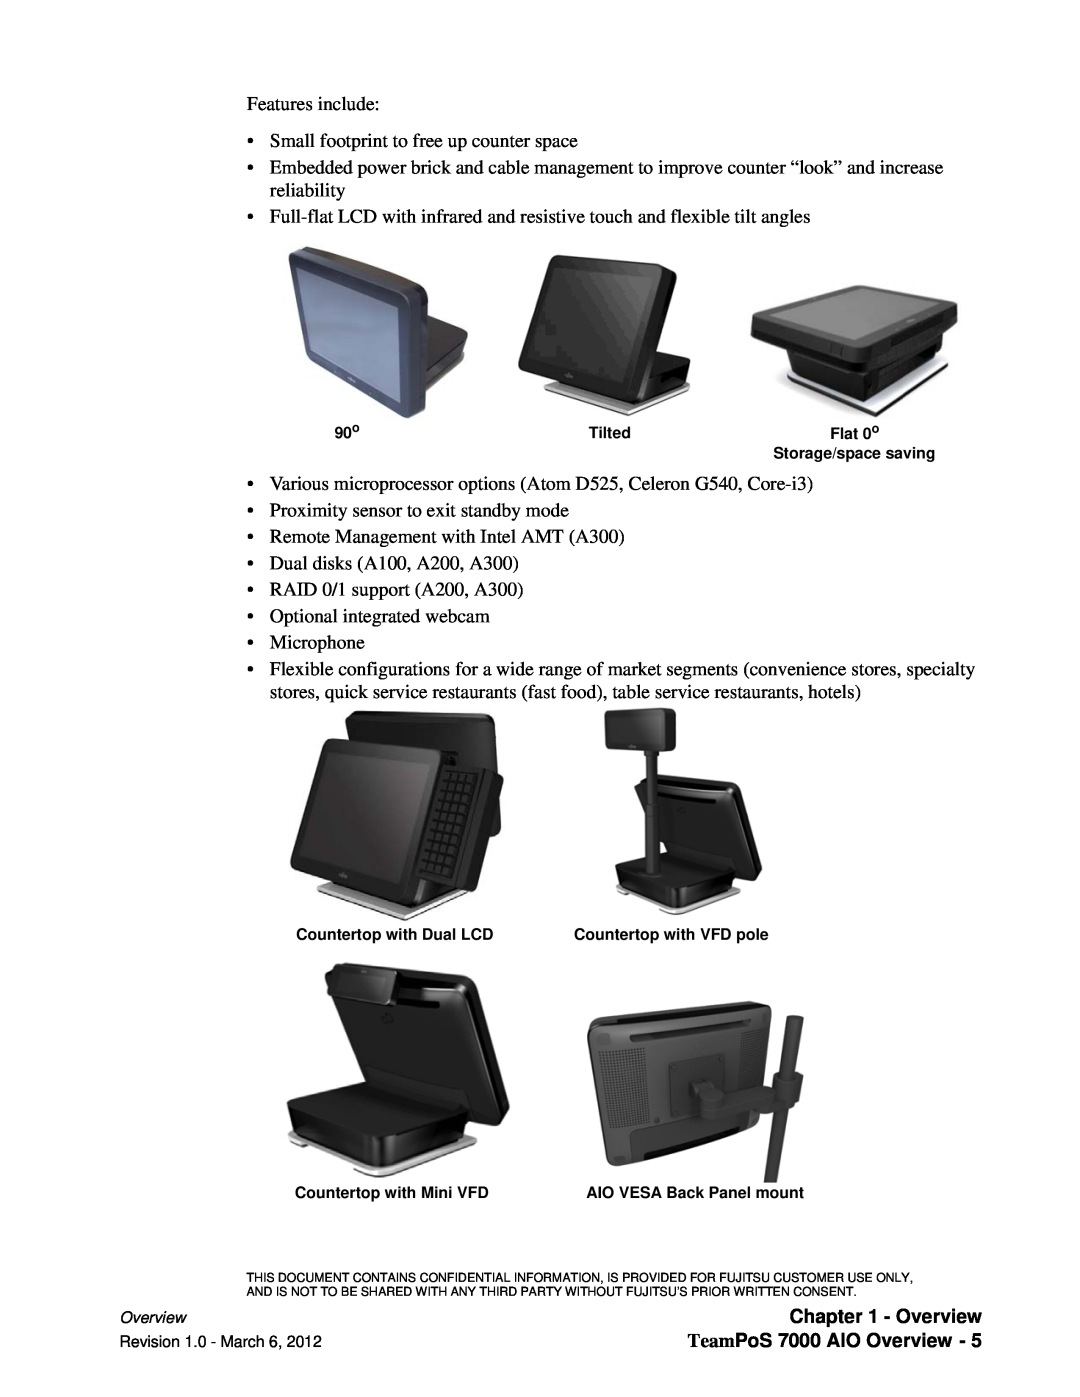 Fujitsu 7000 manual Features include Small footprint to free up counter space, Overview 